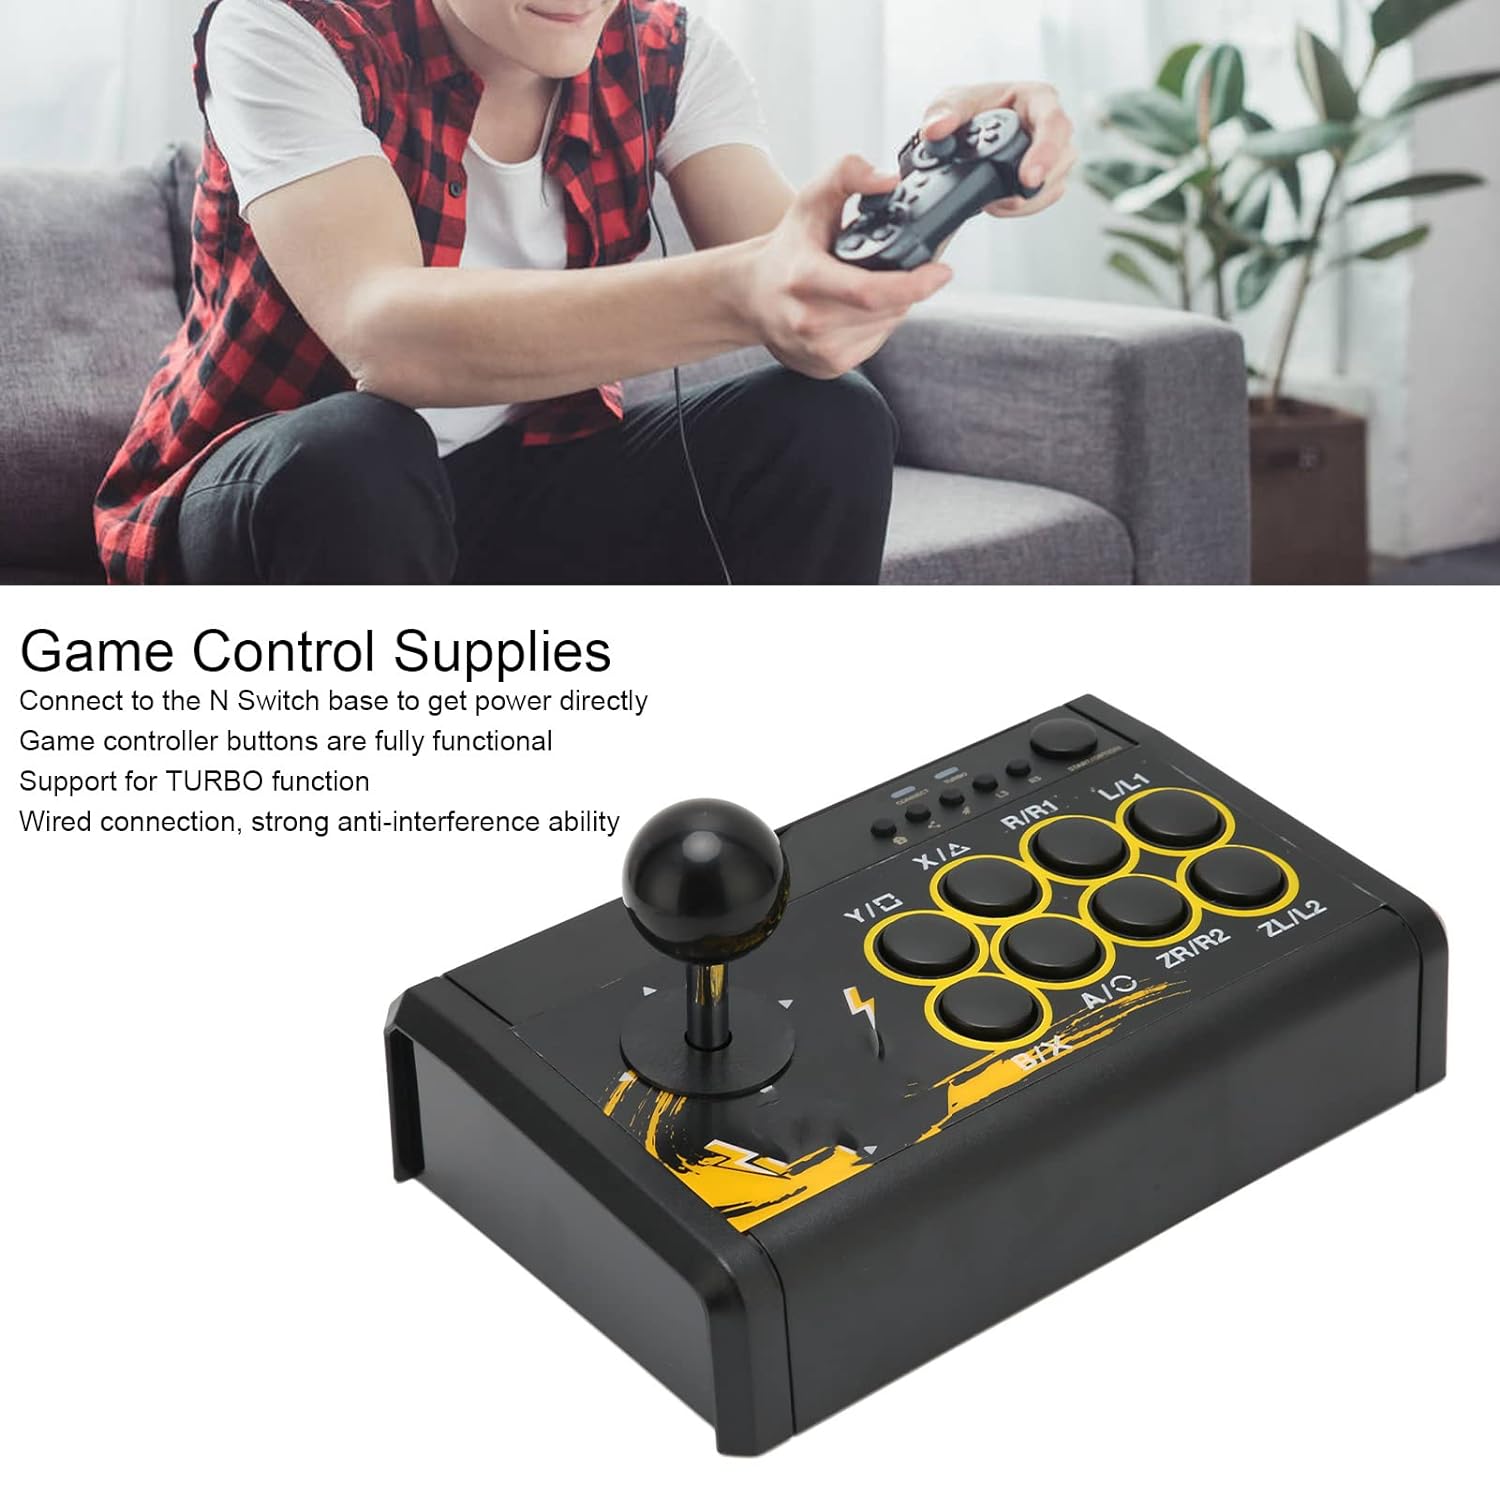 Great Choice Products Arcade Stick, Pc Gaming Controller Usb Wired Game Joystick Retro Arcade Fighting Controller Games Console Gamepad For Ps…